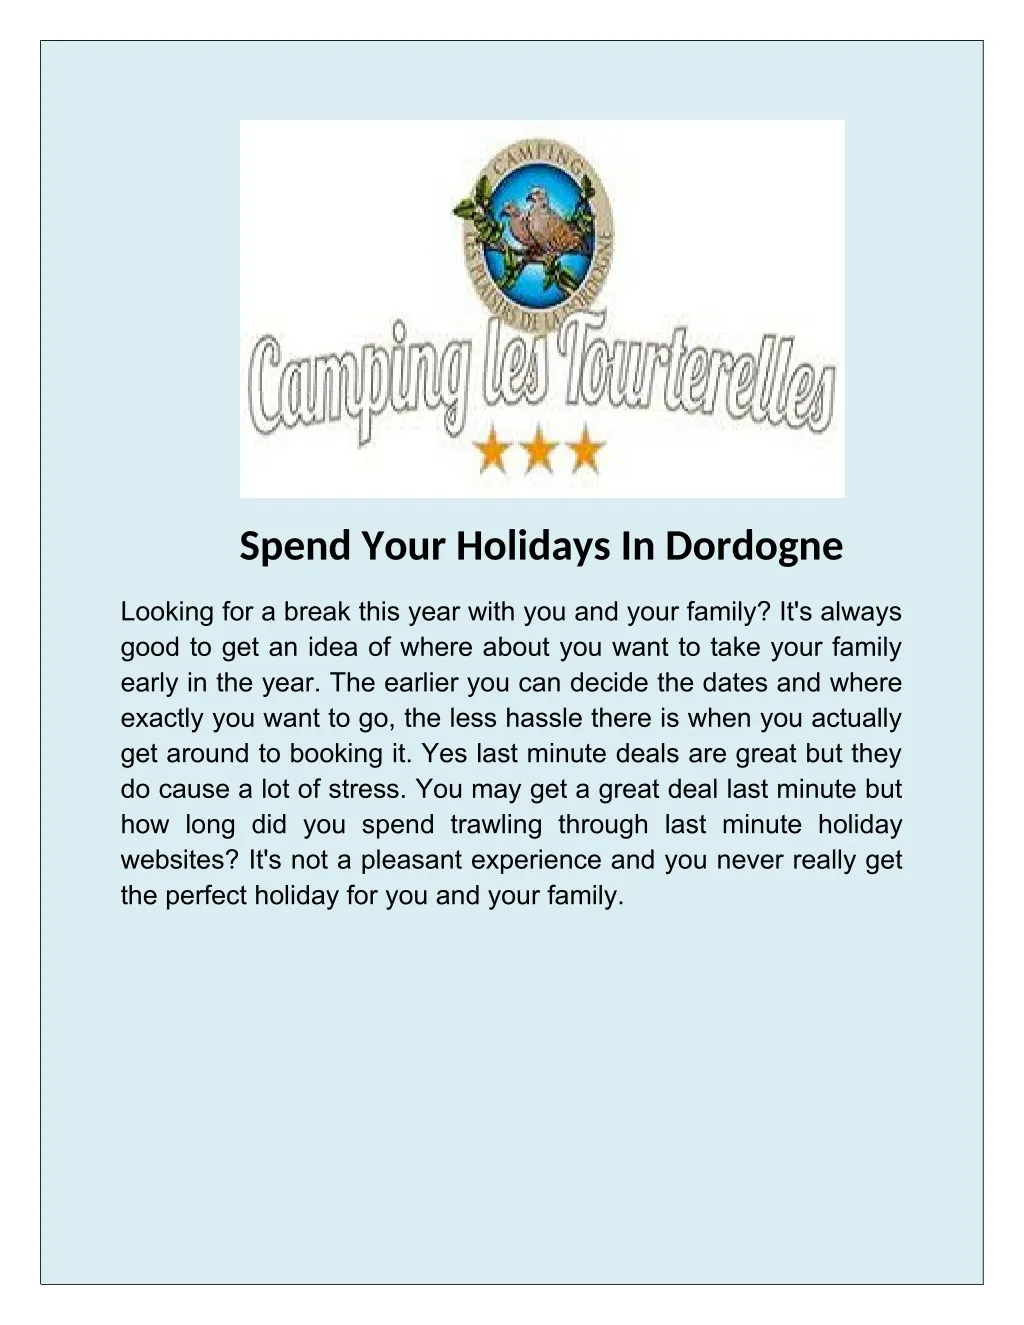 spend your holidays in dordogne